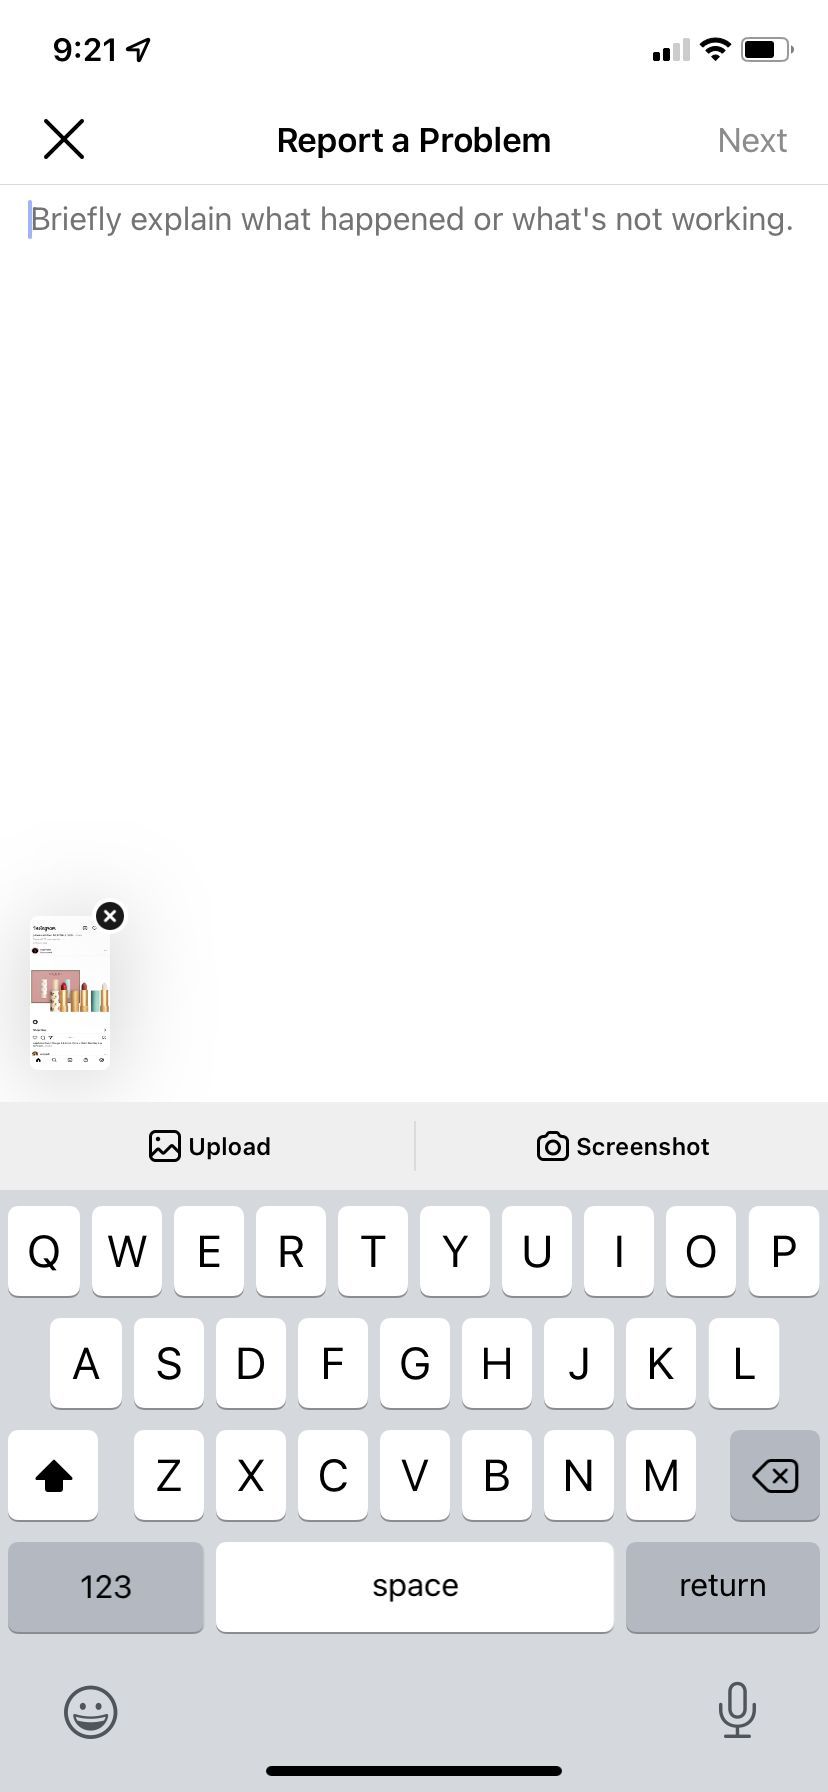 space to insert feedback on isntagram